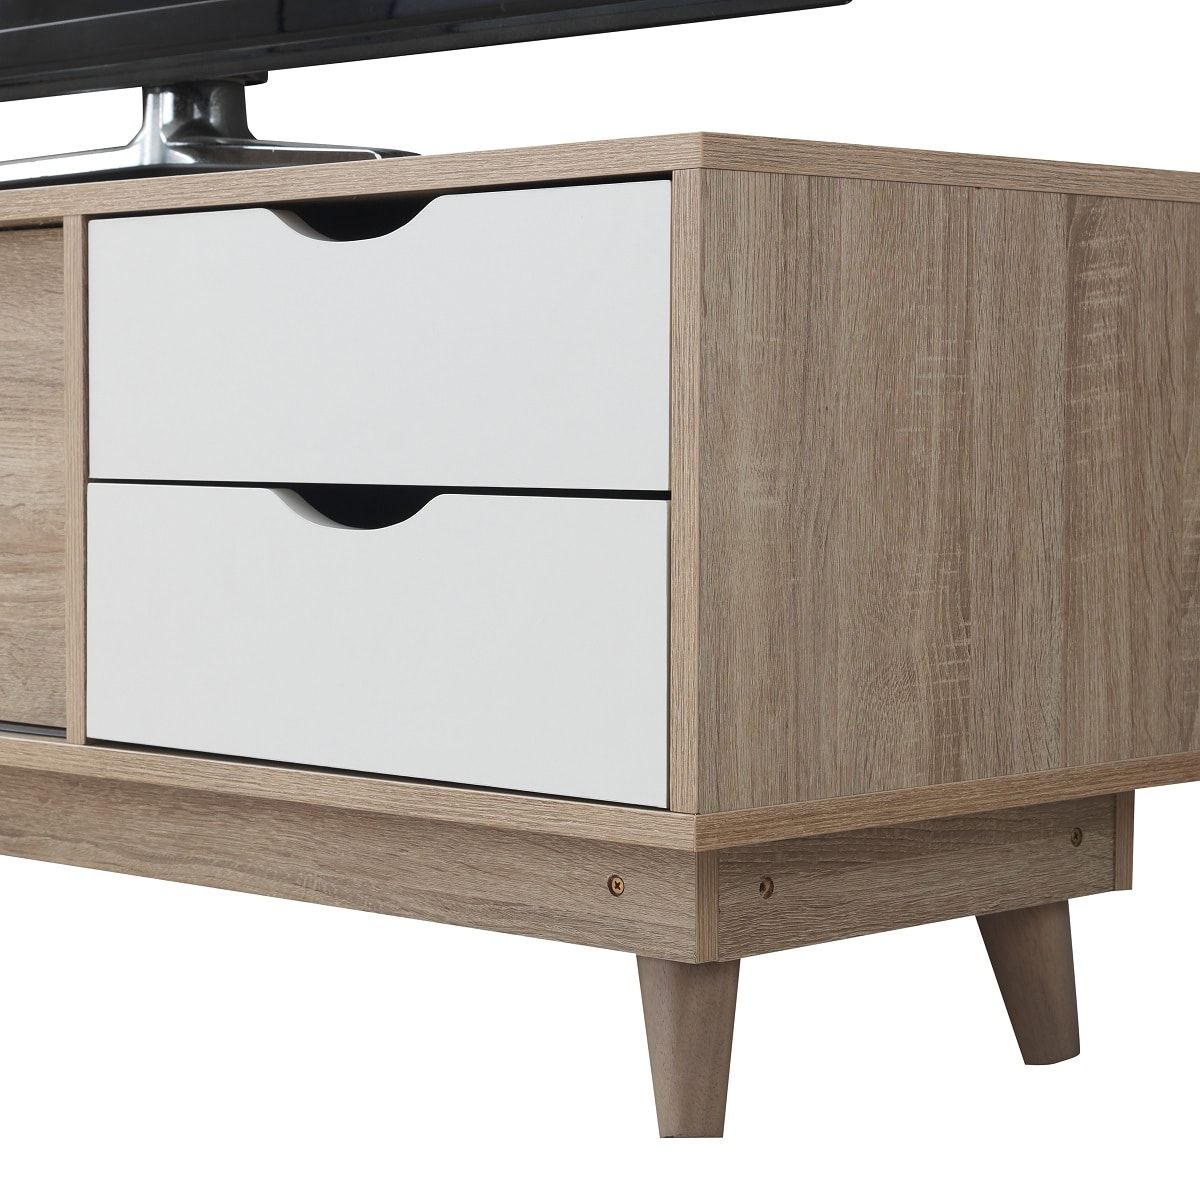 Alford Scandinavian Tv Unit Sonoma Oak & White – Y1 Furniture With Regard To Emmett Sonoma Tv Stands With Coffee Table With Metal Frame (Gallery 9 of 20)